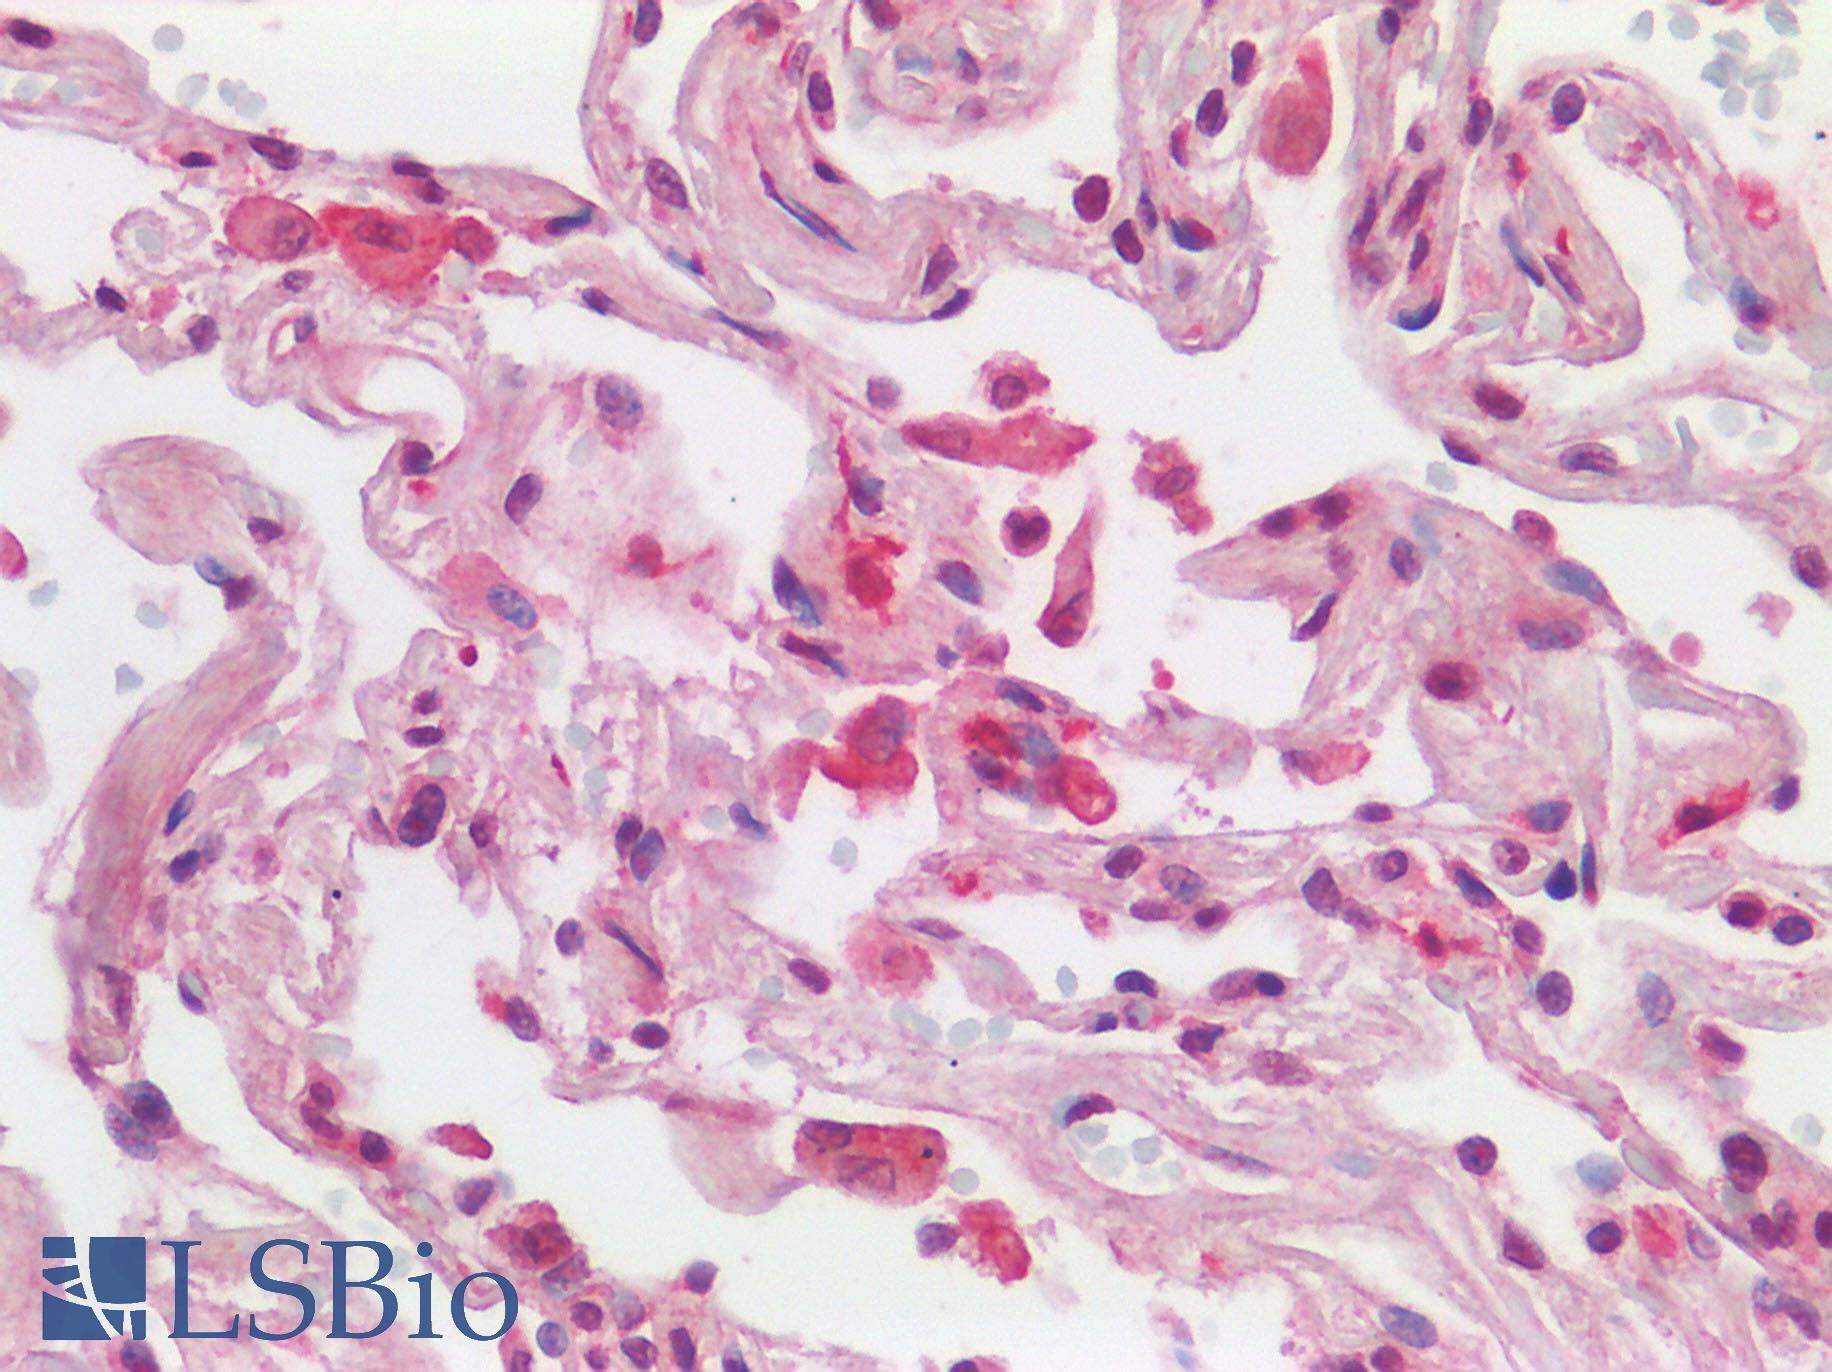 AIF1 / IBA1 Antibody - Human Lung: Formalin-Fixed, Paraffin-Embedded (FFPE) HIER using 10 mM sodium citrate buffer pH 6.0